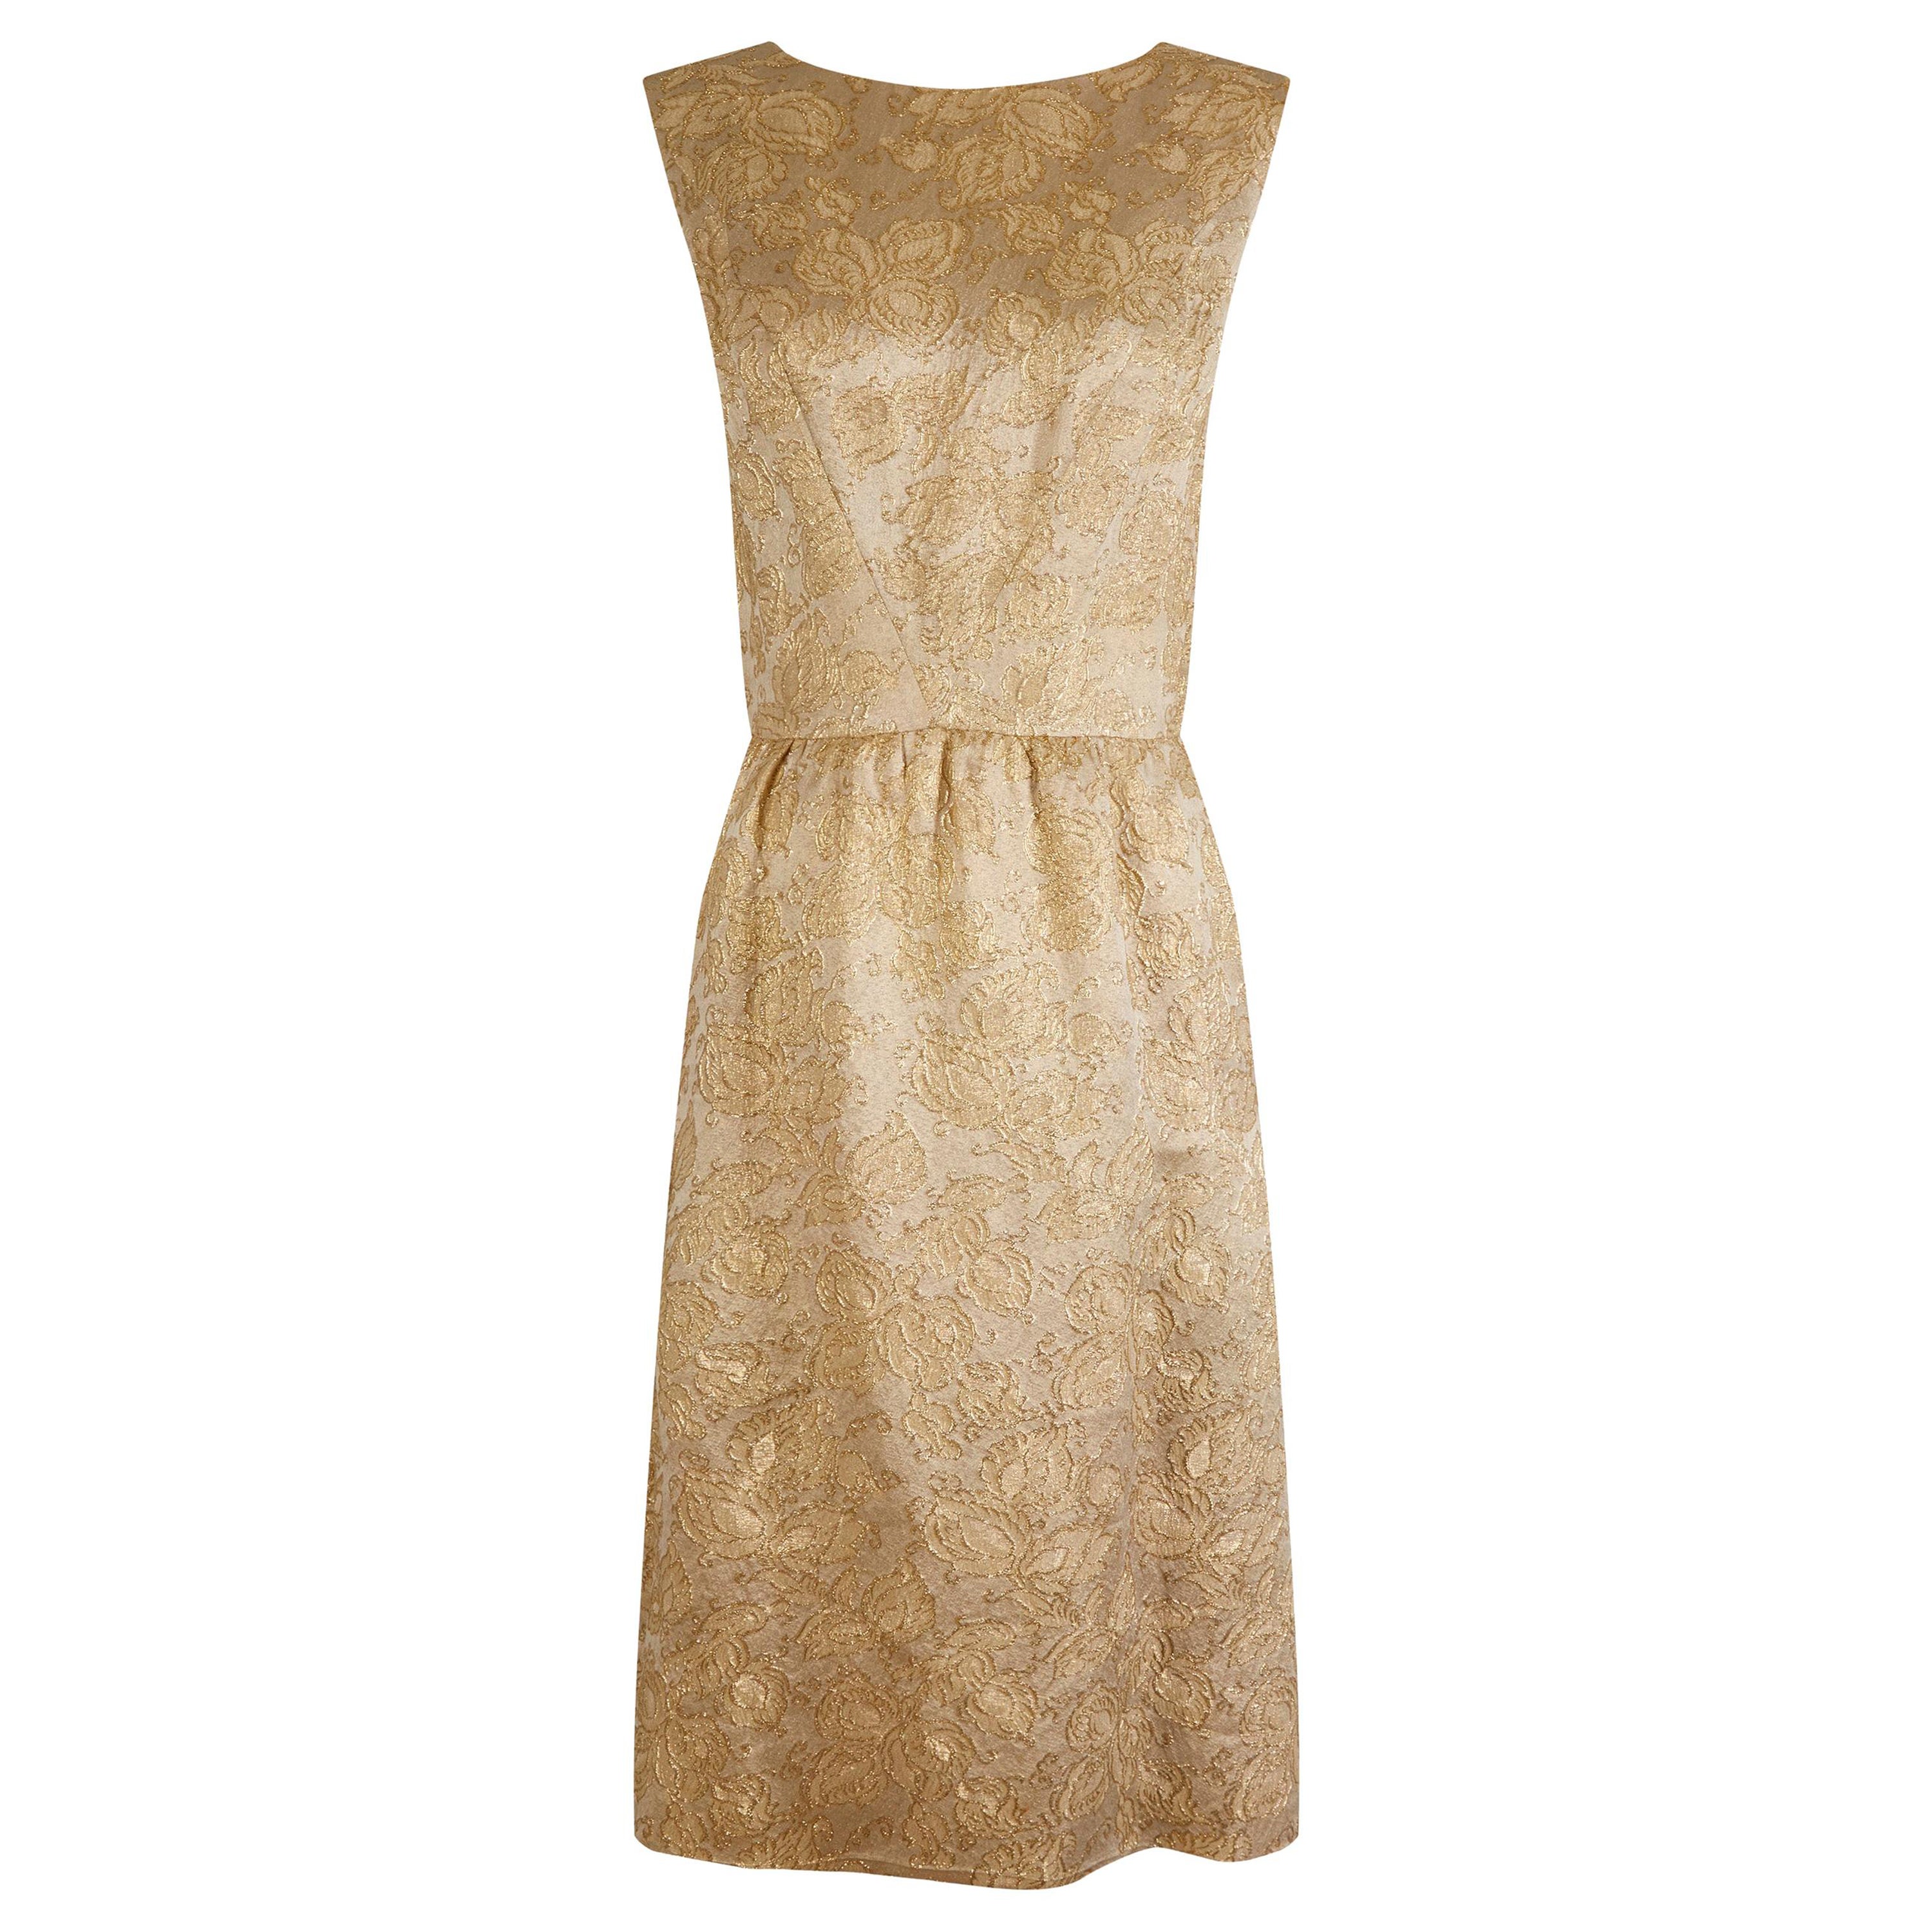 1950s Jacques Heim Demi Couture Gold Brocade Dress For Sale